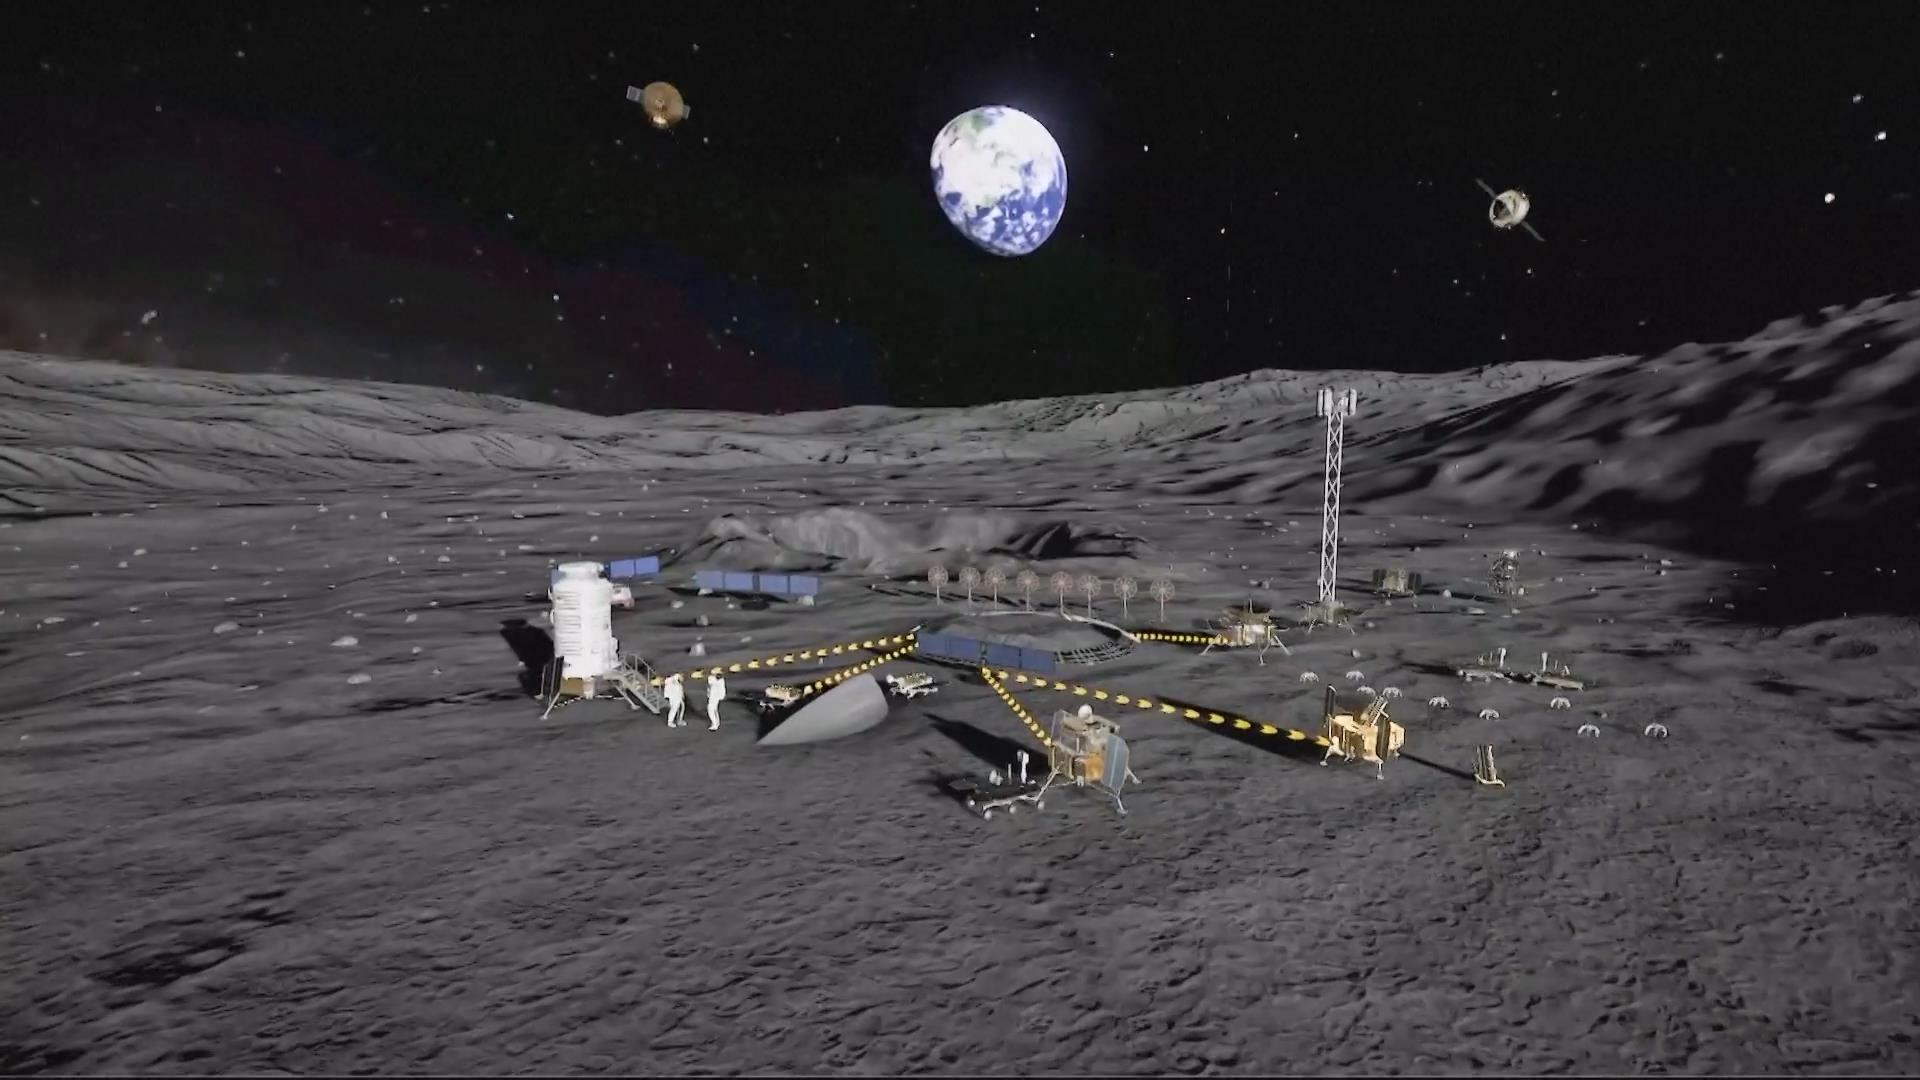 China is Planning to Land Humans on the Moon by 2030 as Part of its Ambitious Lunar Agenda